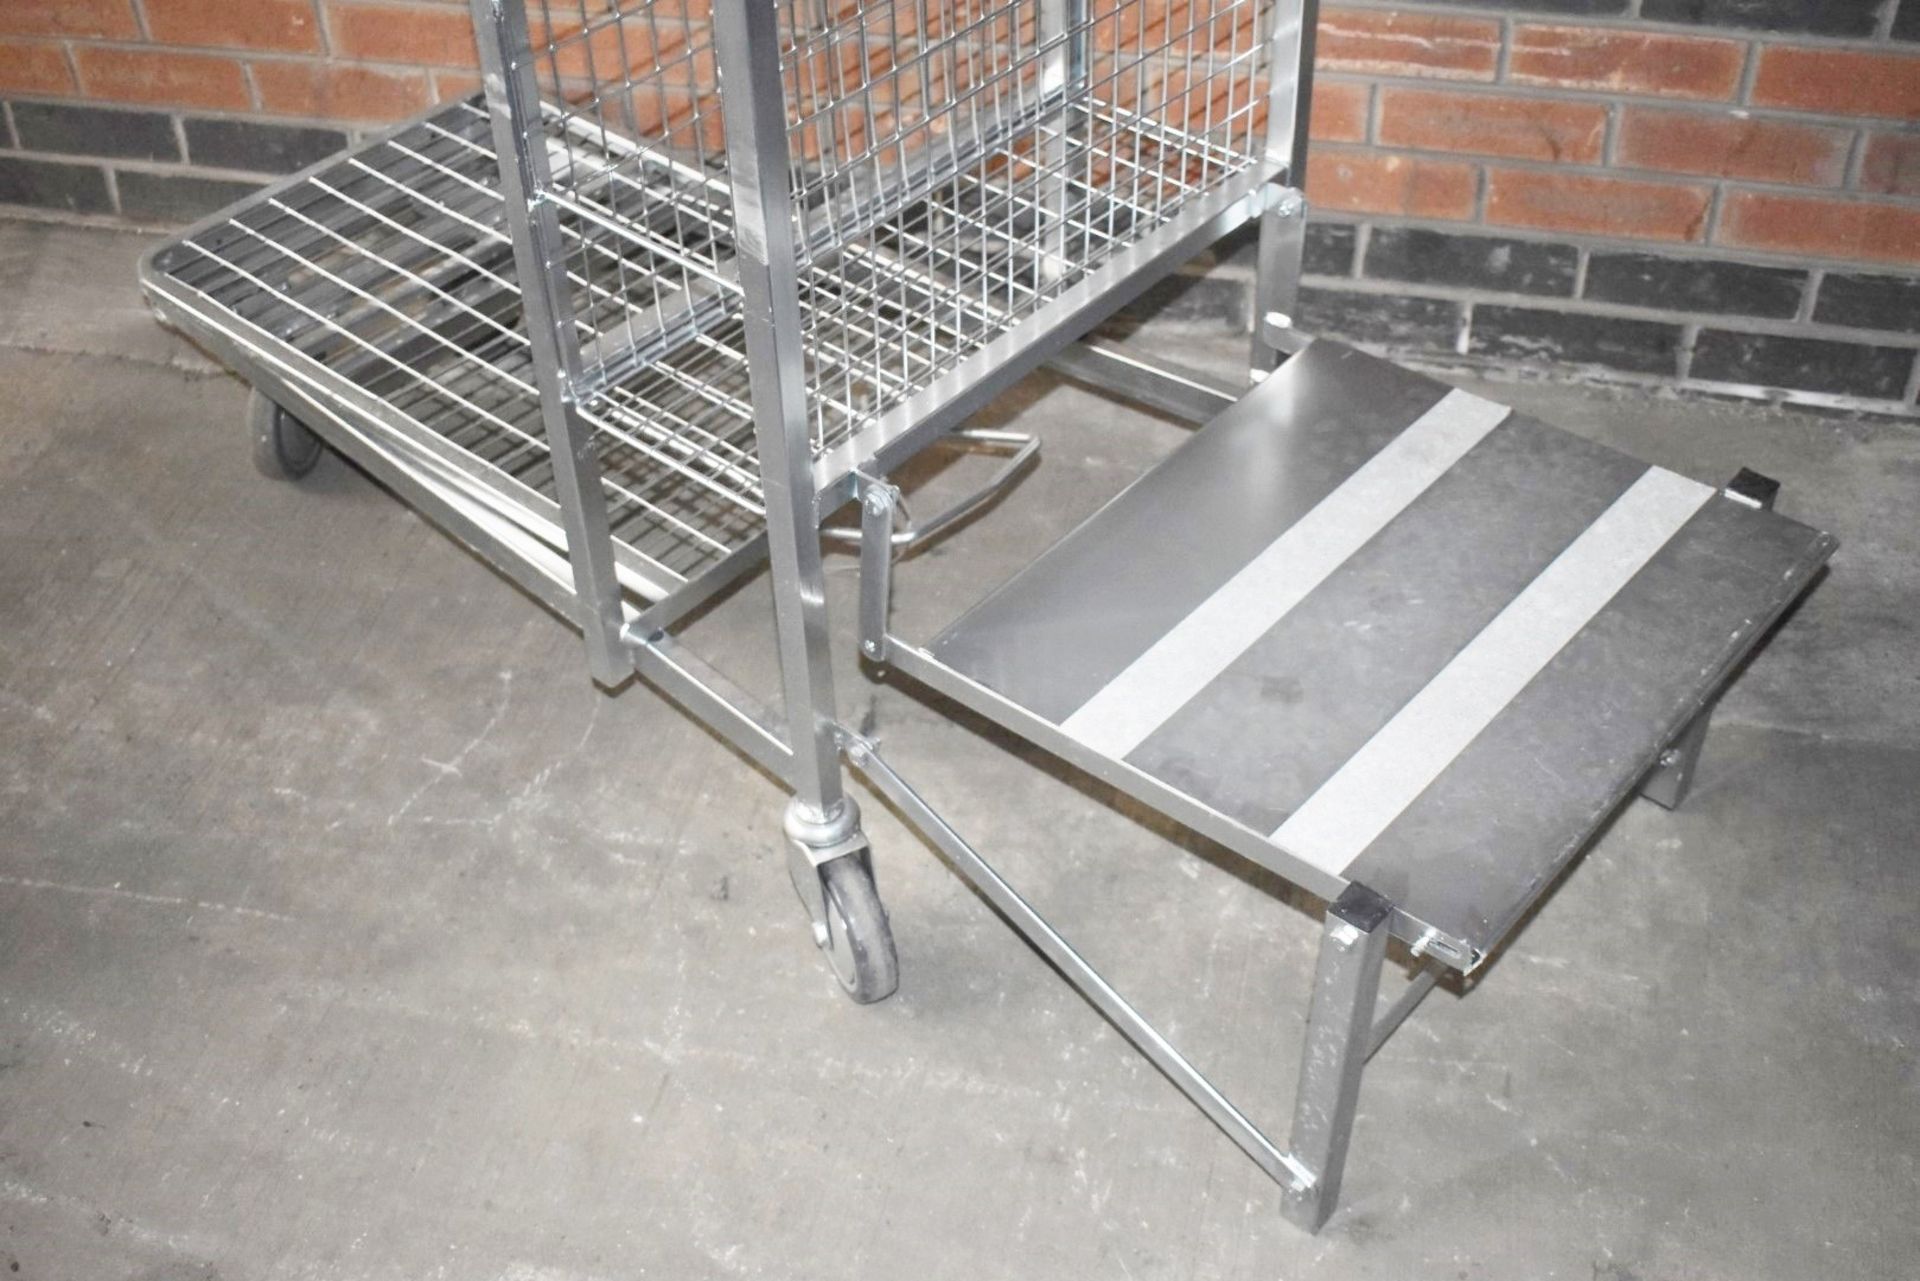 1 x Supermarket Retail Merchandising Trolley With Pull Out Step and Folding Shelf - CL595 - Ref: CCA - Image 3 of 9